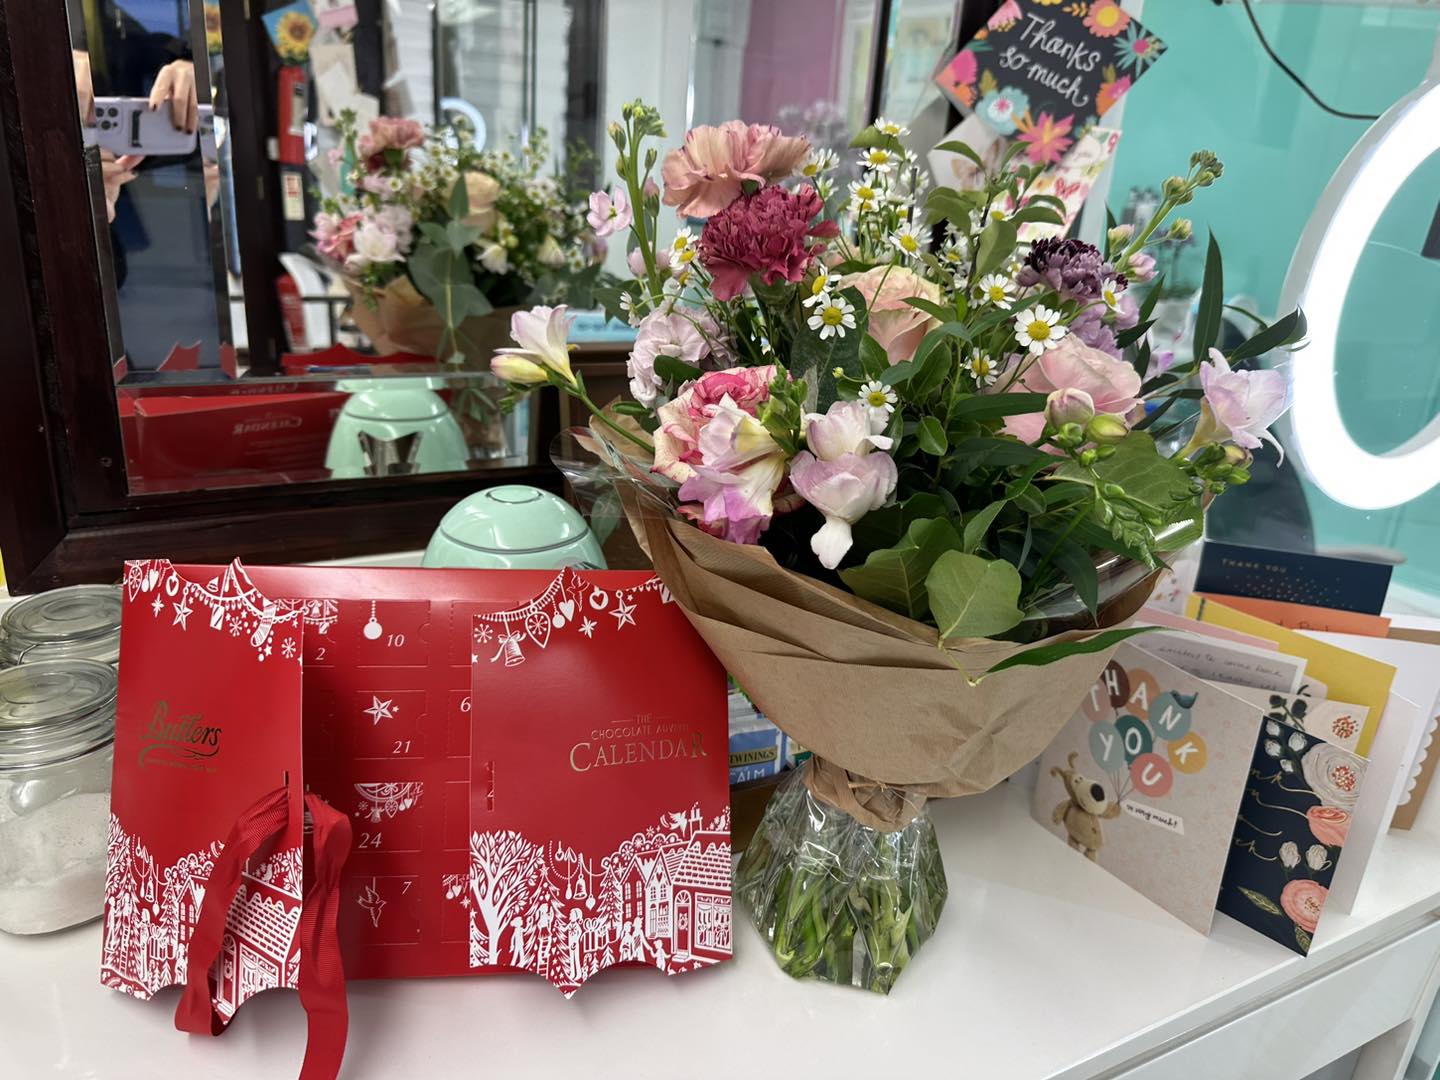 Kate's gift of flowers and a chocolate advent calendar